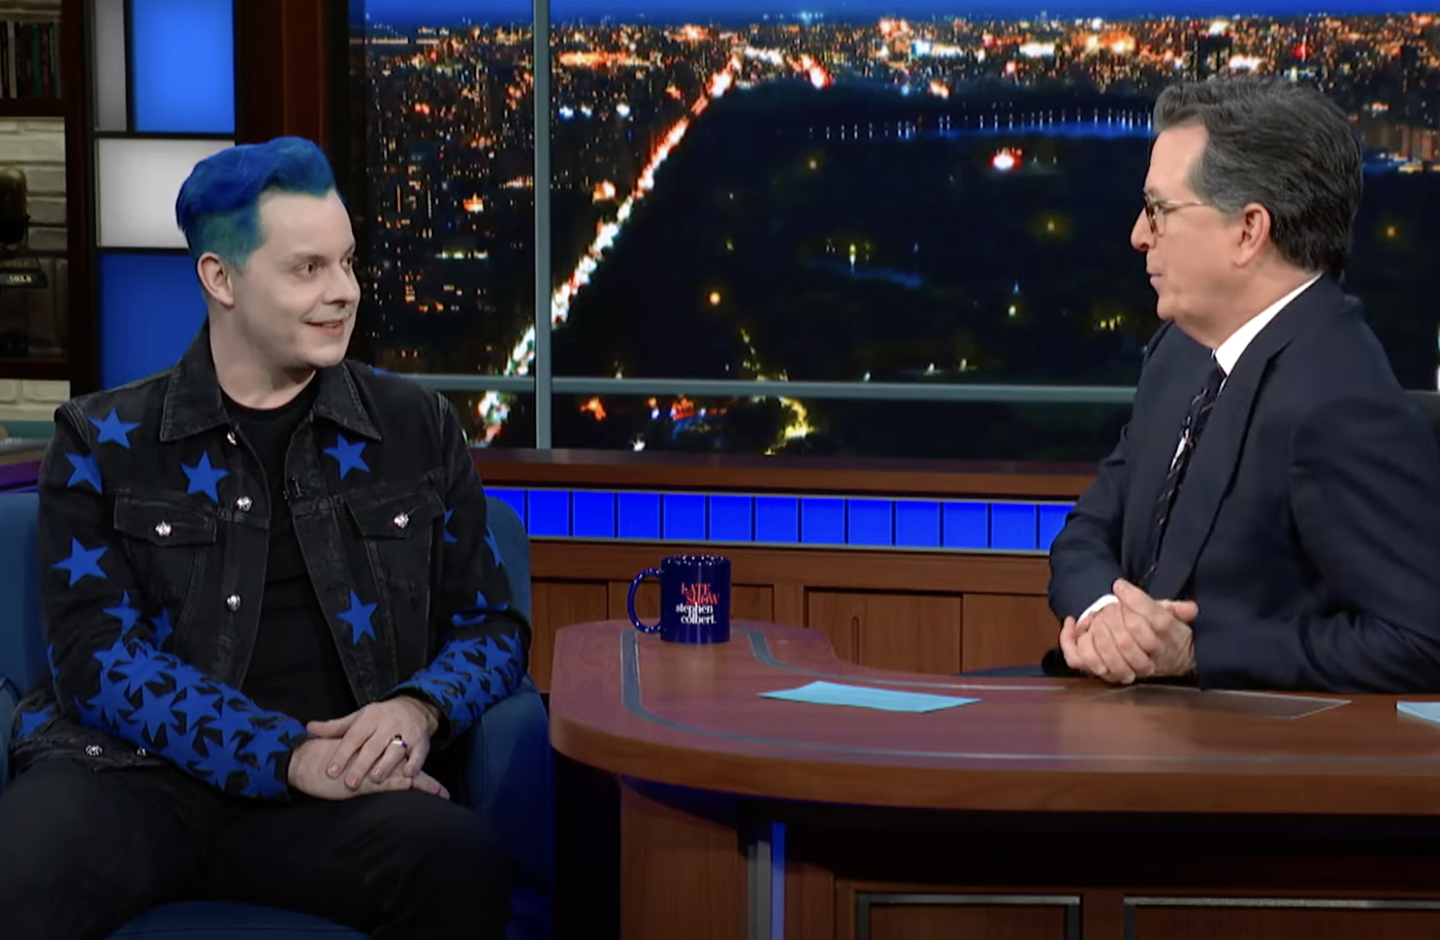 Jack White on The Late Show